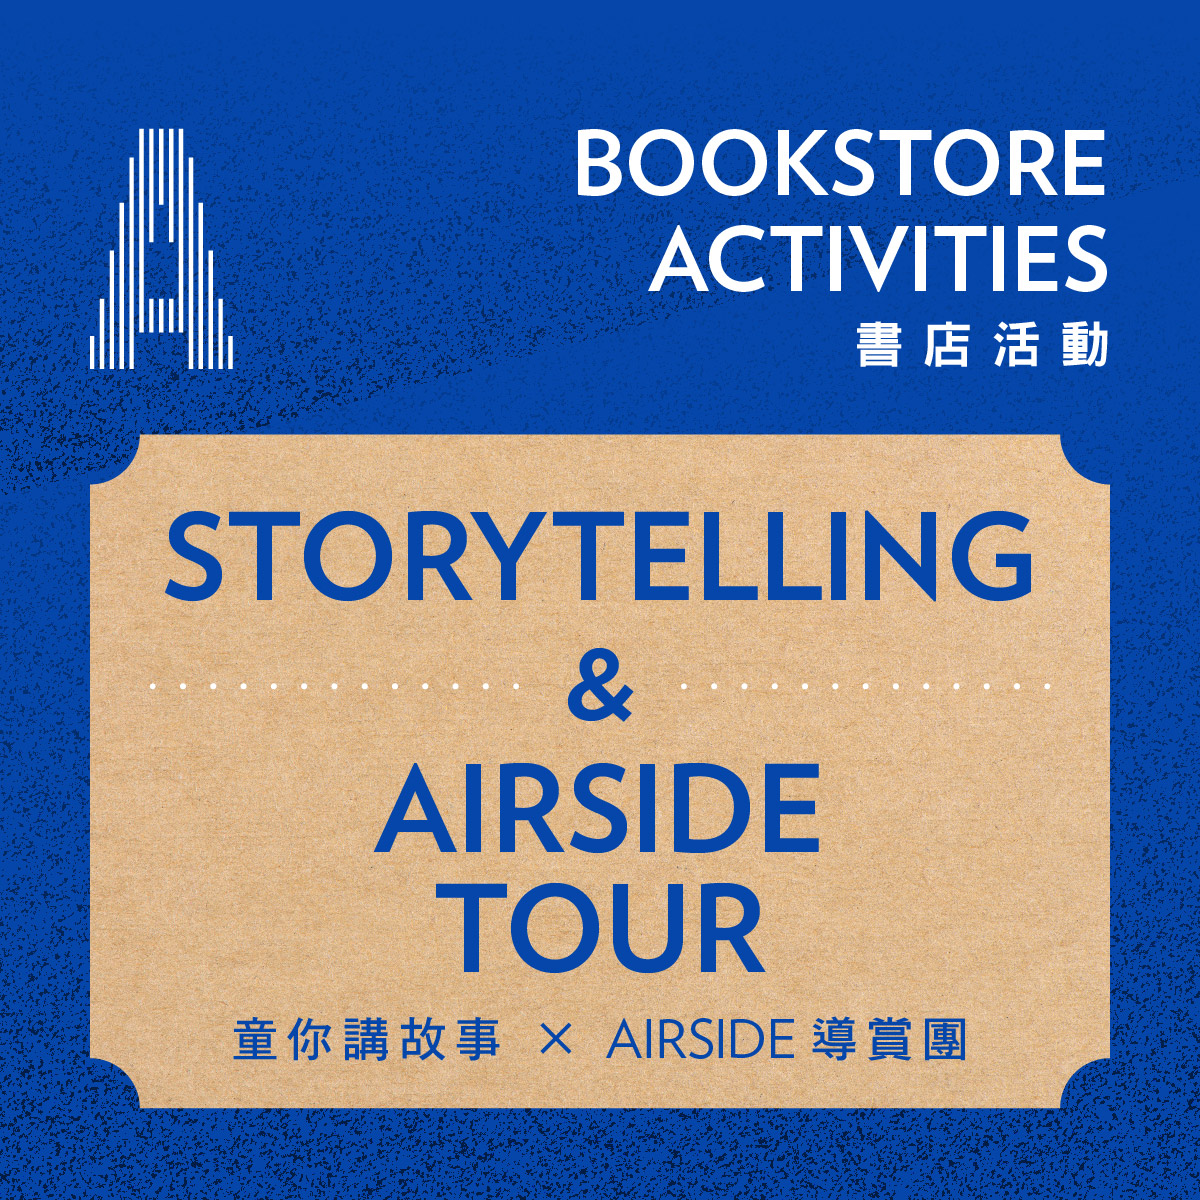 A Bookstore : Storytelling and AIRSIDE Tour